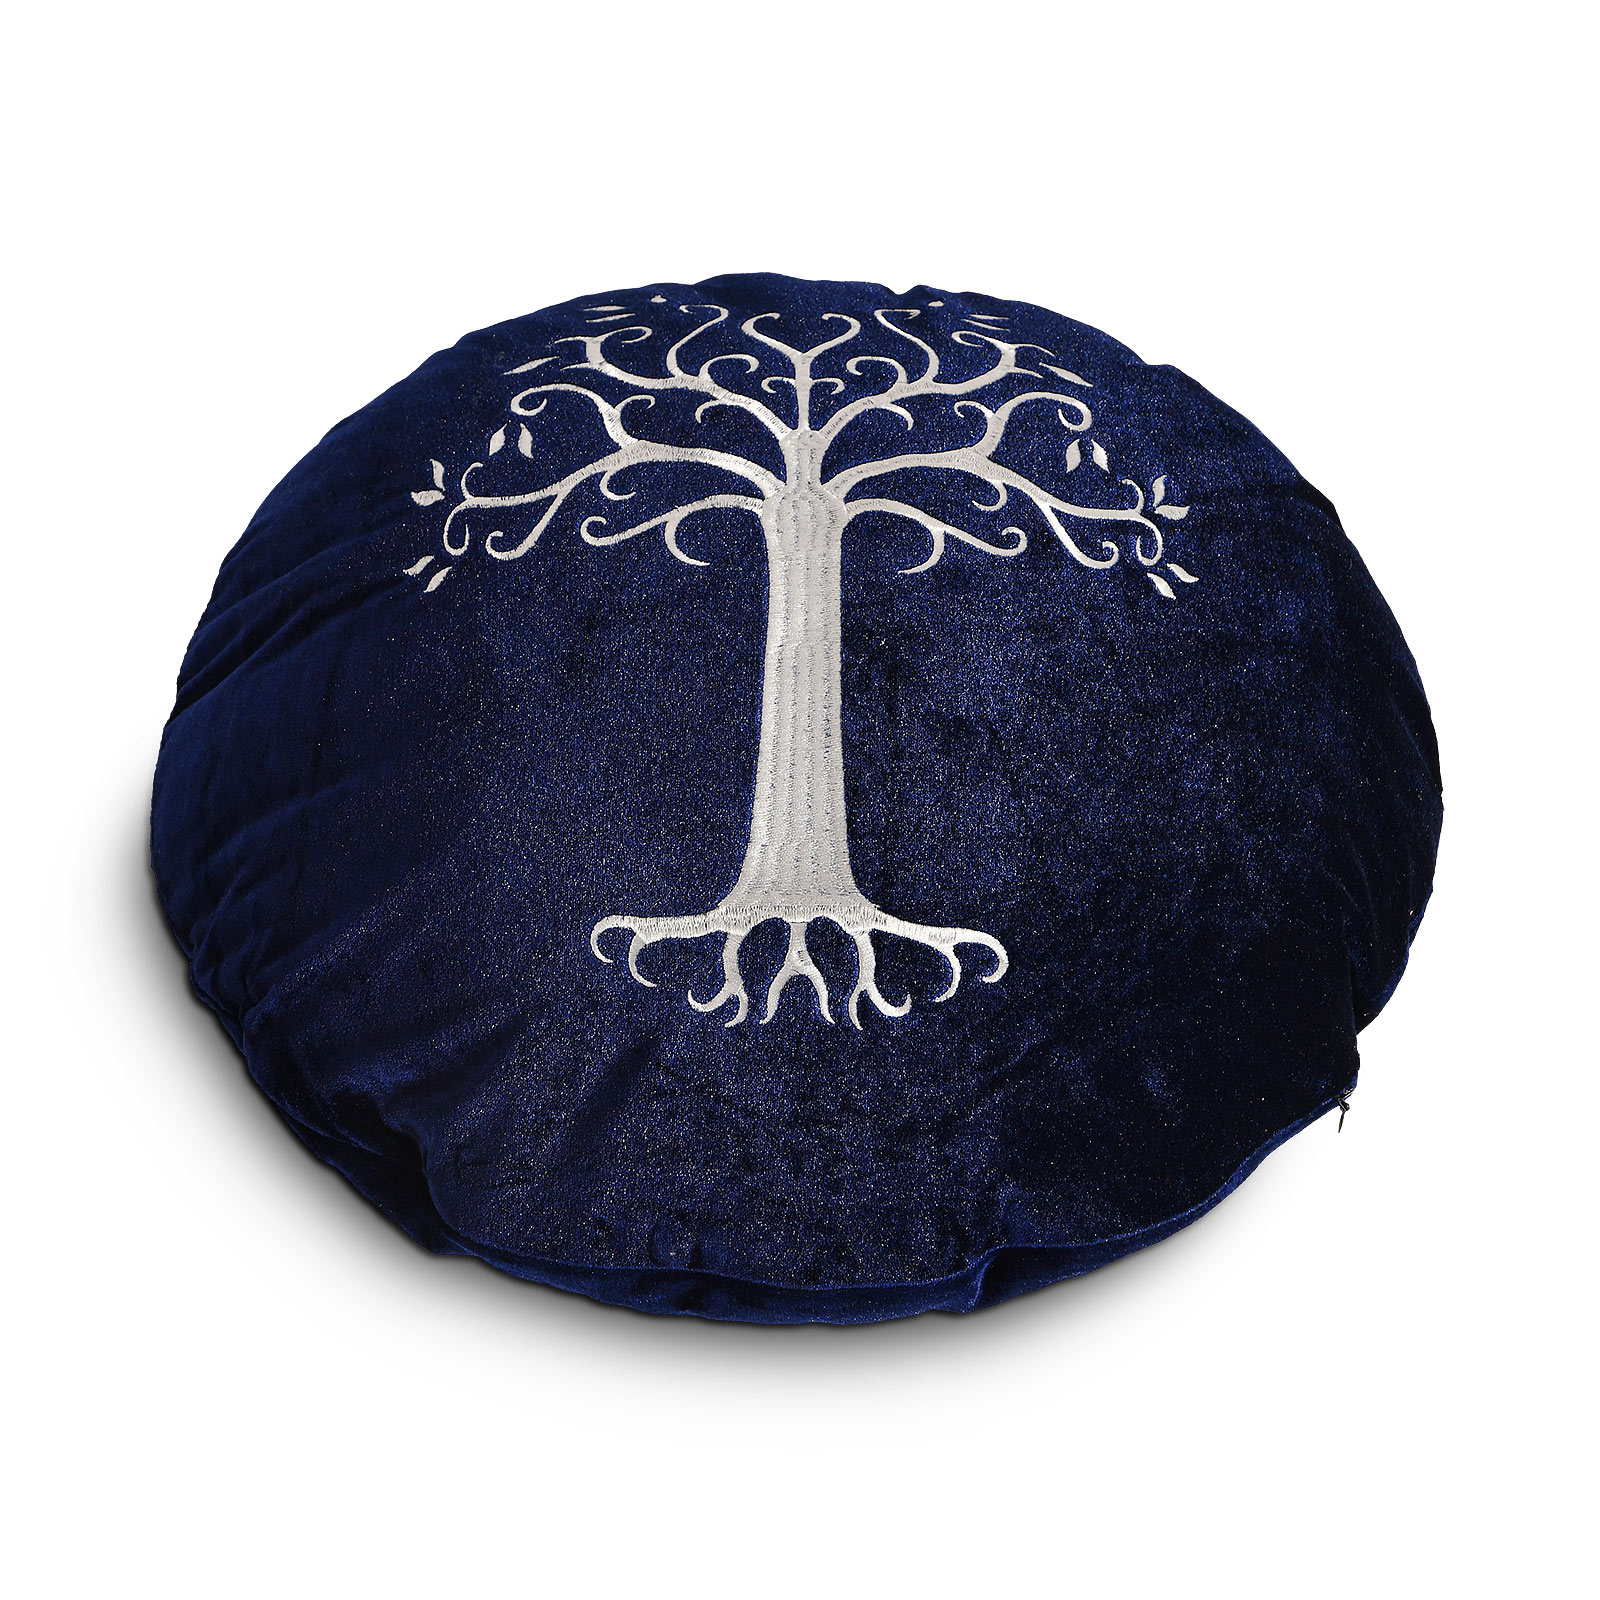 Lord of the Rings - White Tree of Gondor Cushion